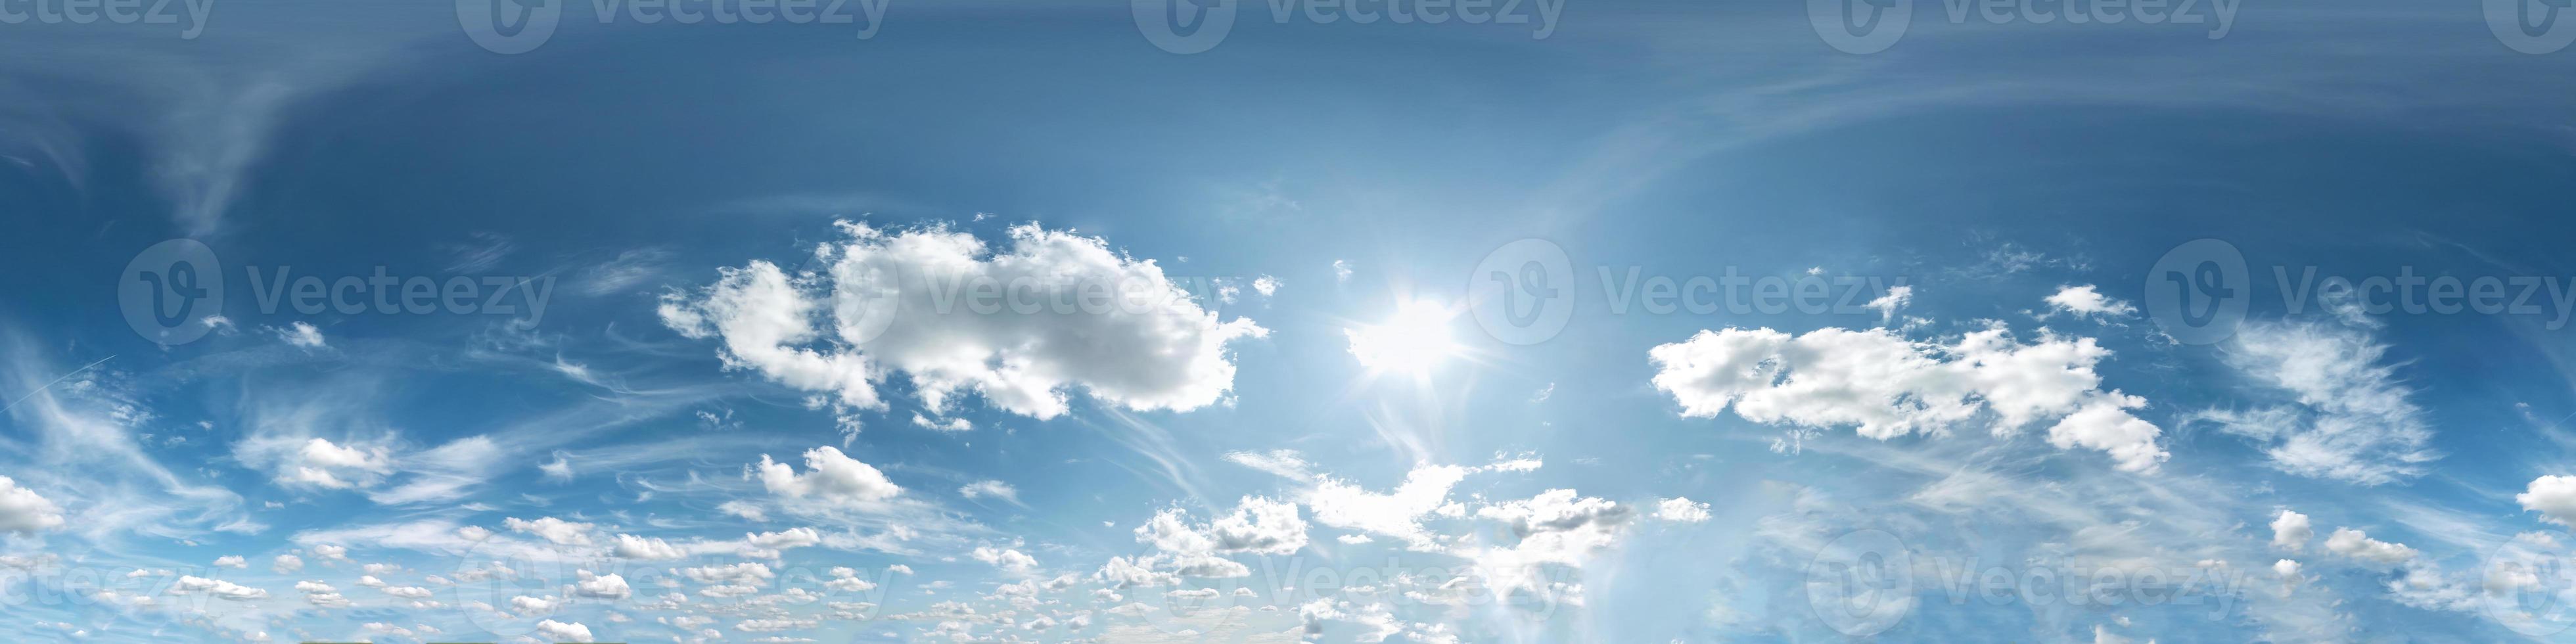 blue sky with rain storm clouds. Seamless hdri panorama 360 degrees angle view with zenith for use in 3d graphics or game development as sky dome or edit drone shot photo